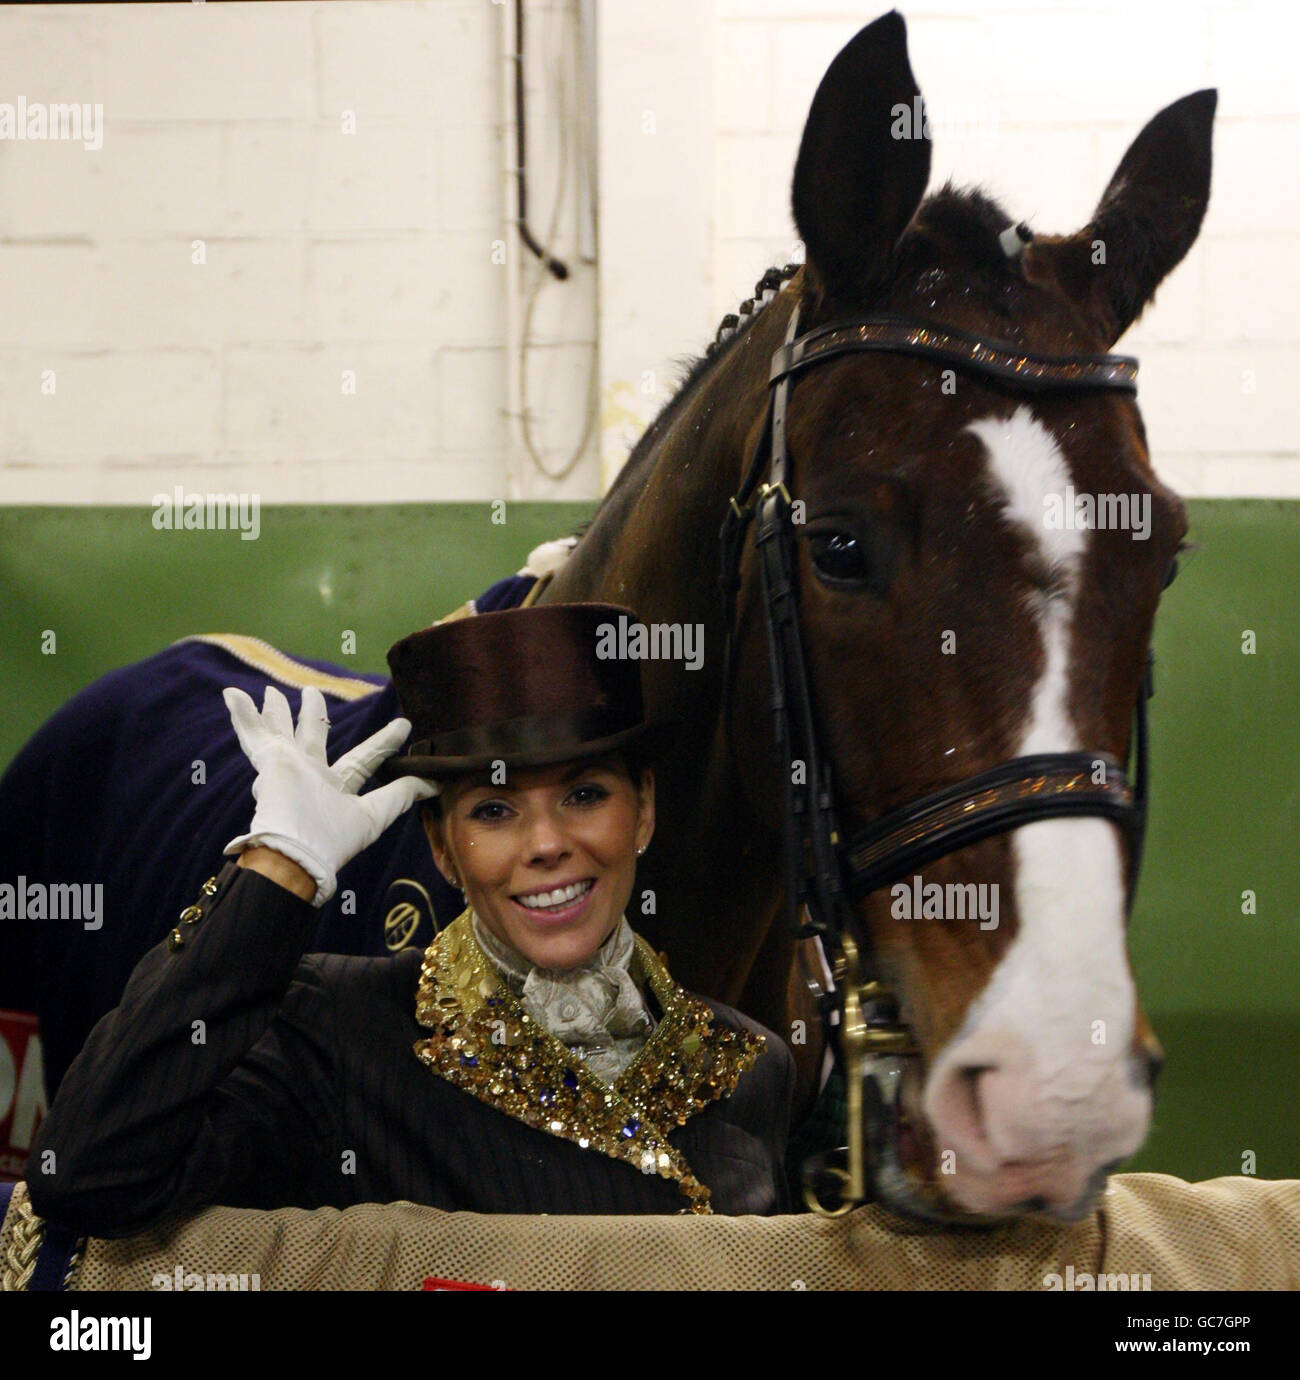 Toni Terry wife of Chelsea and England Captain John, after performing dressage during the London International Horse Show at the Olympia Exhibition Centre, London. Stock Photo